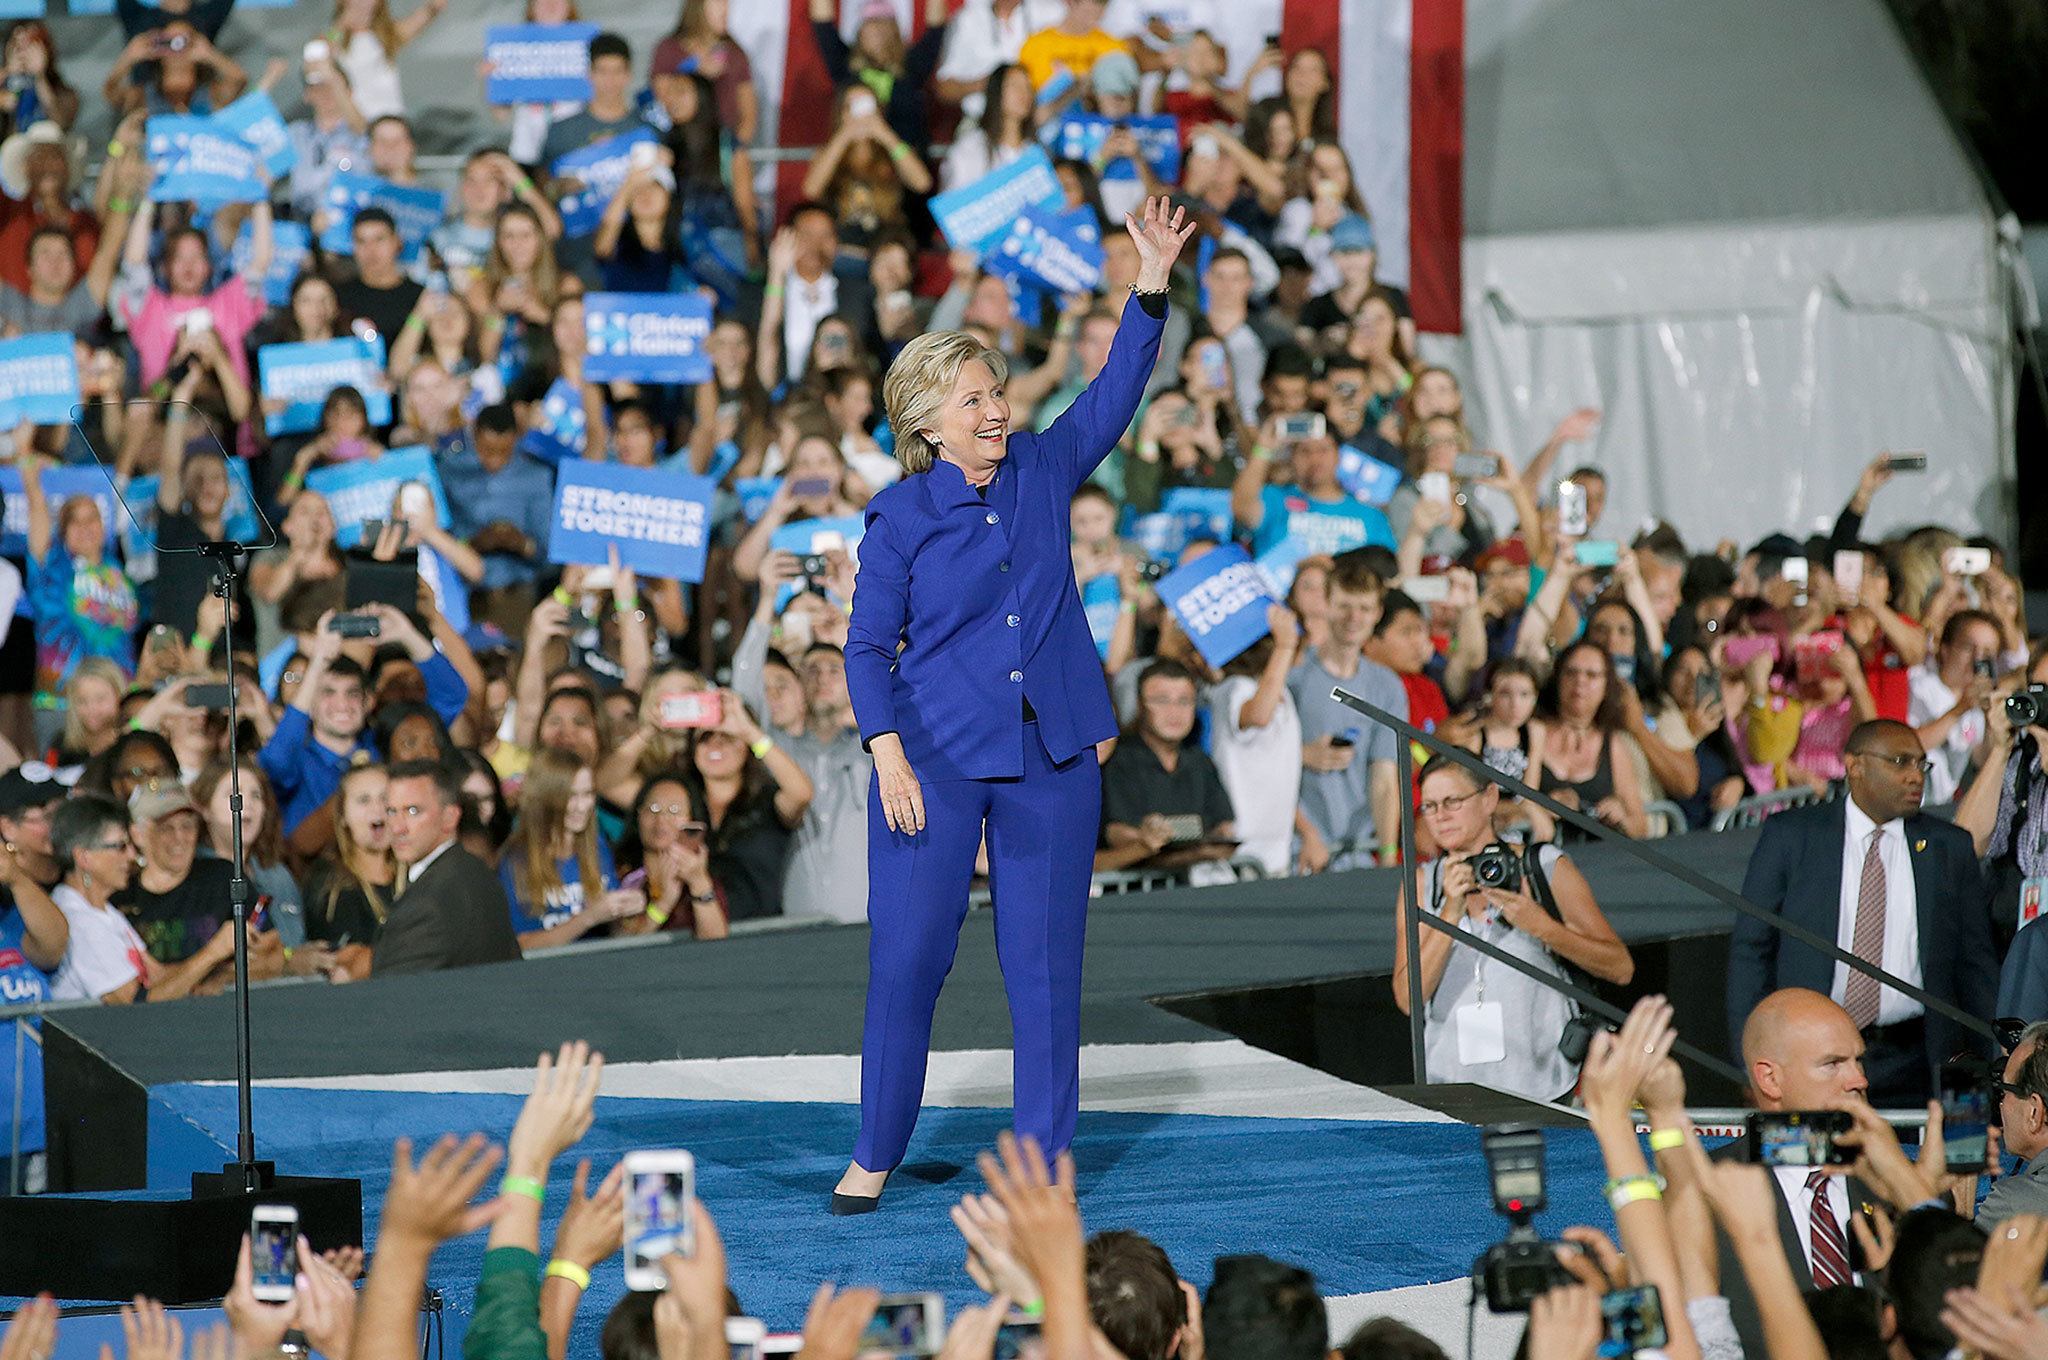 Democratic presidential candidate Hillary Clinton waves to supporters as she arrives at a campaign rally Wednesday in Tempe, Arizona. (AP Photo/Ross D. Franklin)